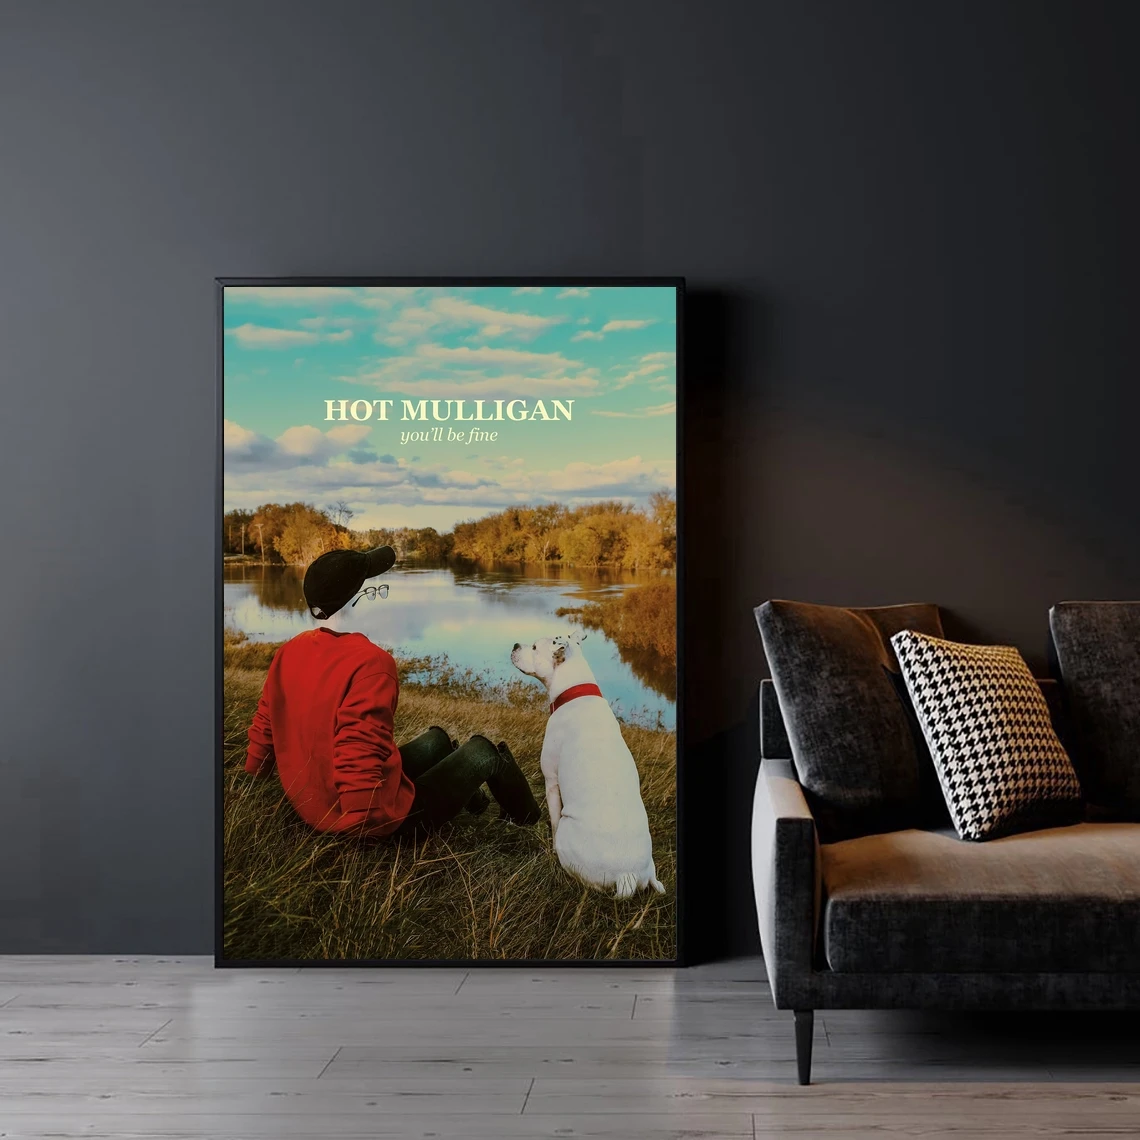 

Hot Mulligan You’ll Be Fine Music Album Cover Poster Rap Hip Hop Pop Music Star Canvas Poster Print (No Frame)